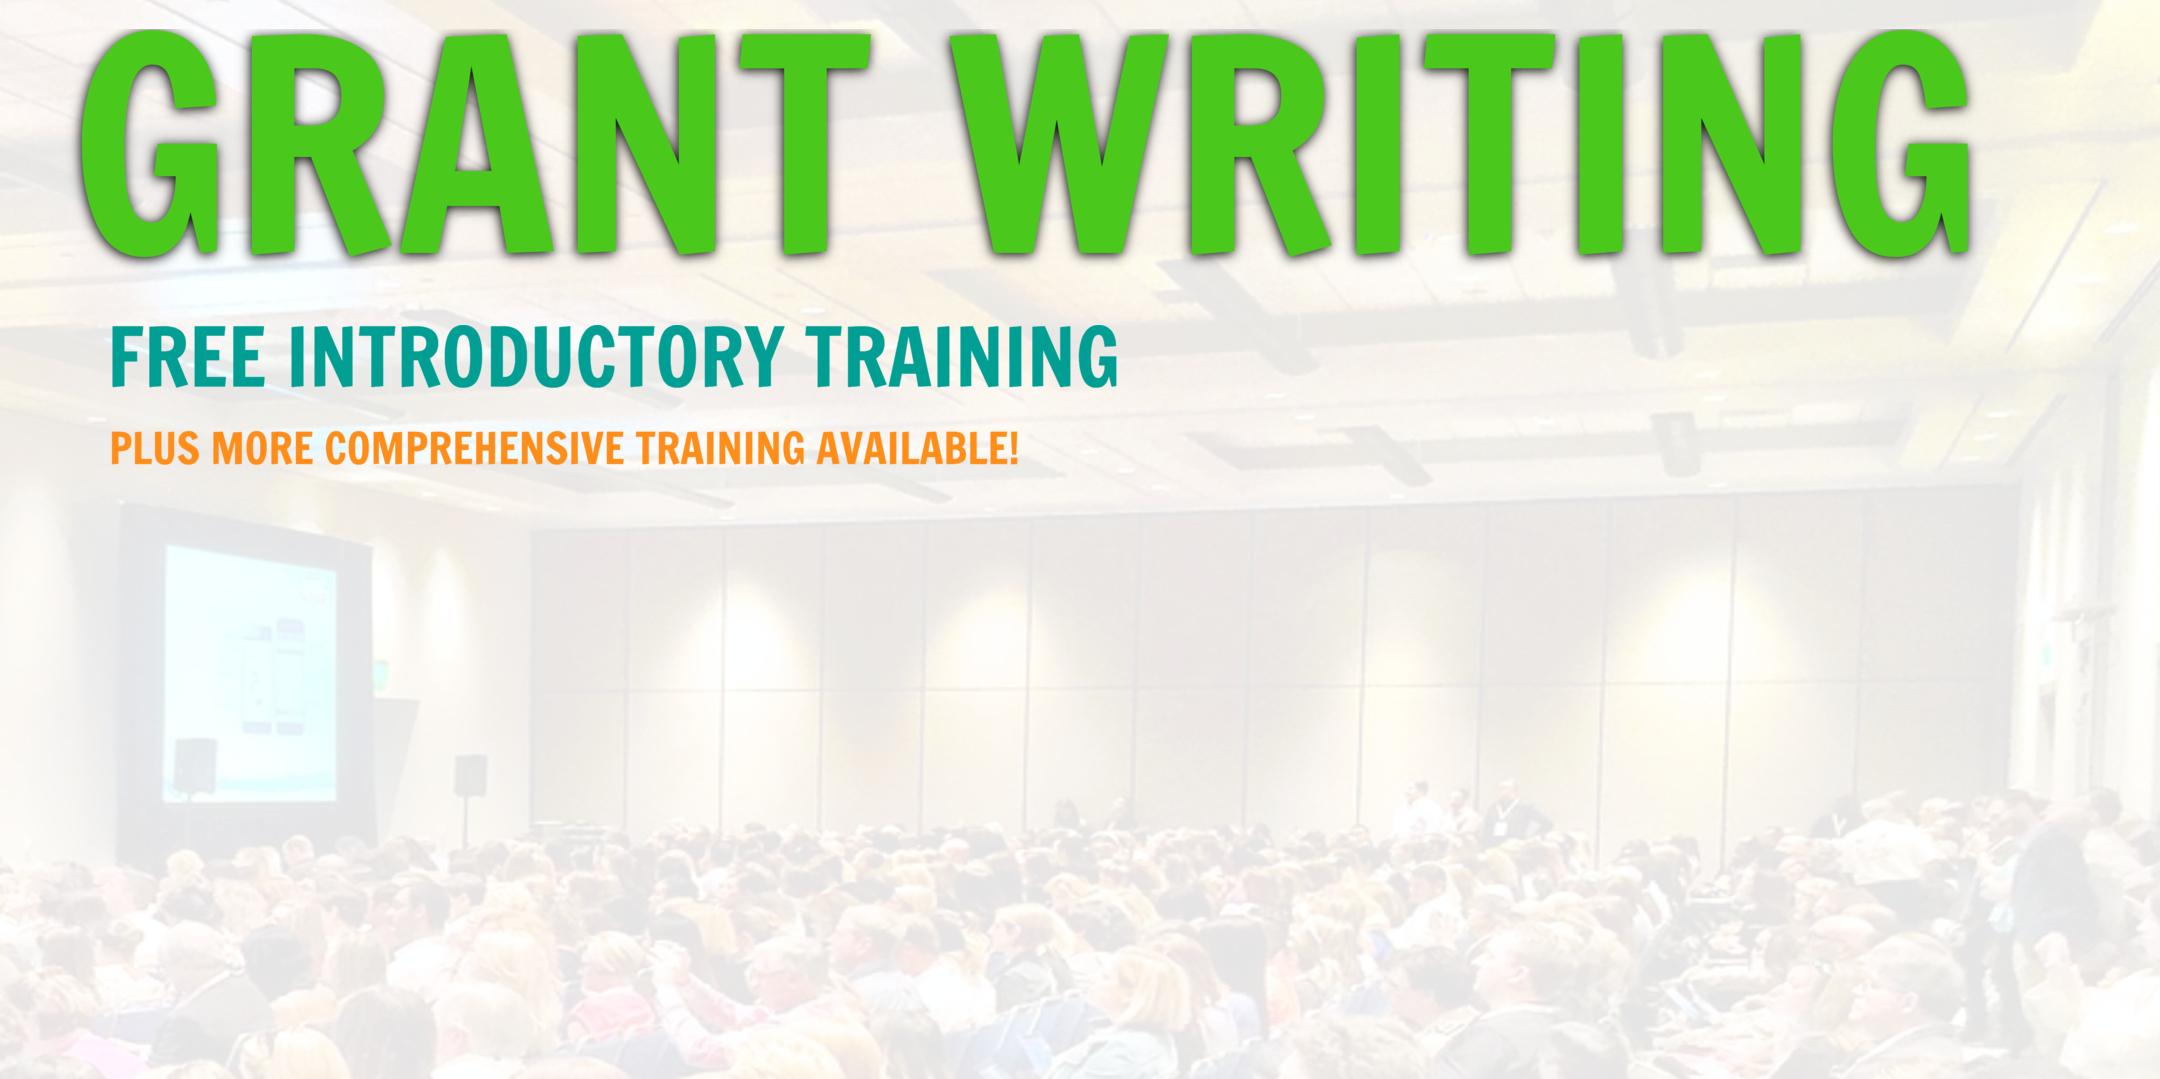 Grant Writing Introductory Training... Elizabeth, New Jersey